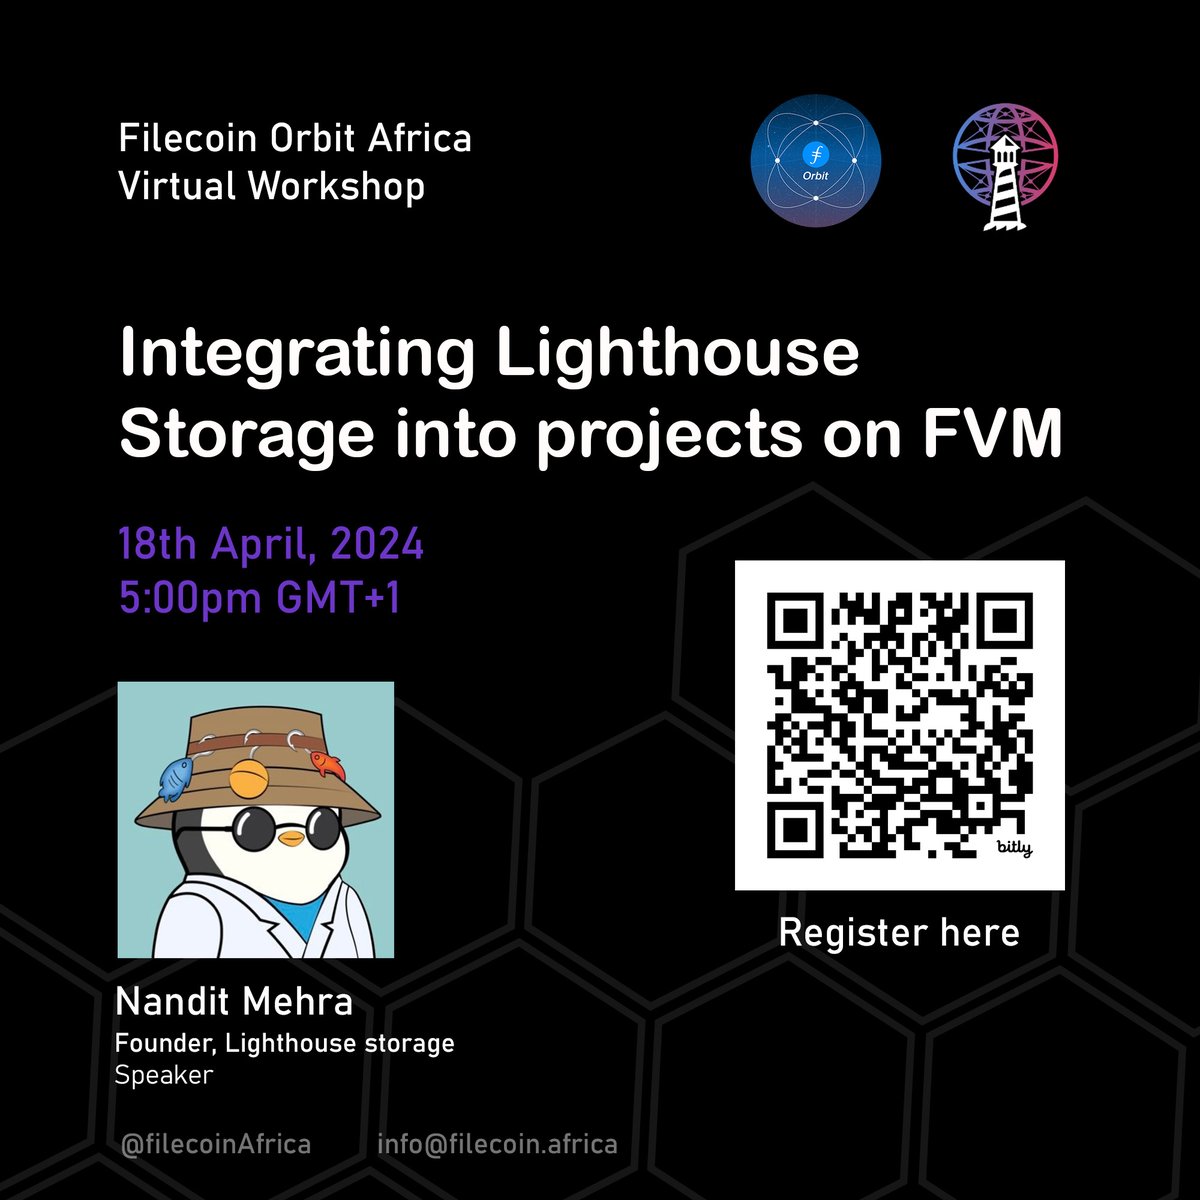 Big moves !!! Catch Nandit Mehra, the boss of Lighthouse Storage, today. We're diving deep into FVM/IPC projects and how to level up with Lighthouse Storage. Secure your spot now, lu.ma/Lighthousestor… it's gonna be lit! 🔥 #LighthouseStorage #FVMIPCWorkshop #LevelUp